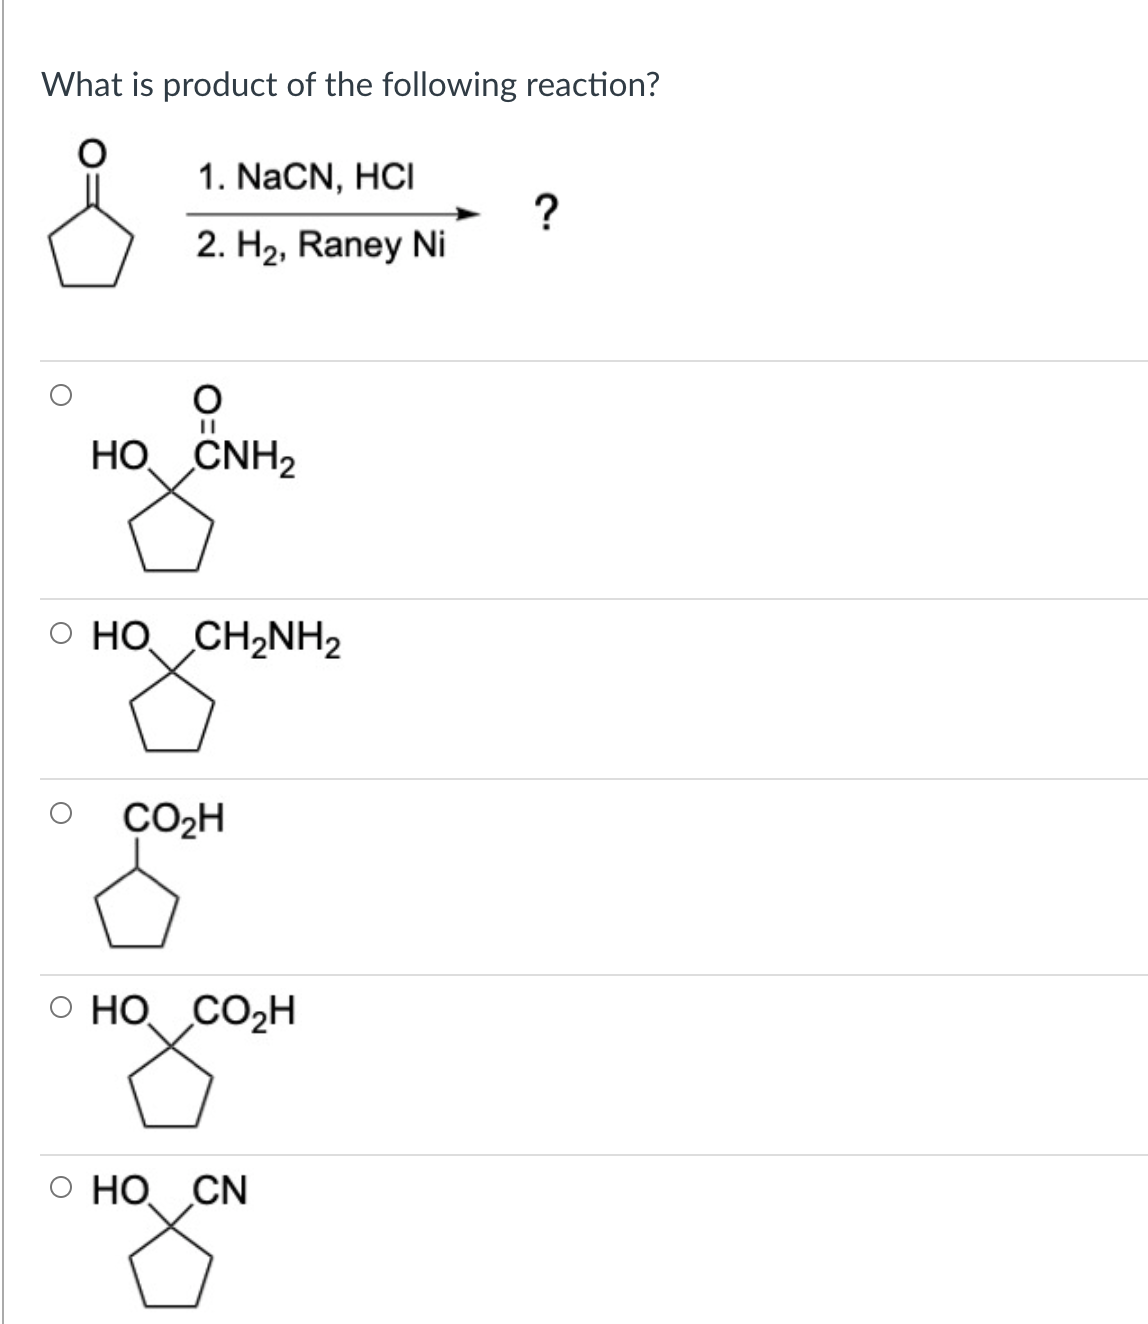 What is product of the following reaction?
1. NaCN, HCI
2. H2, Raney Ni
HO CNH2
O HO CH2NH2
CO2H
O HO CO2H
О НО CN
